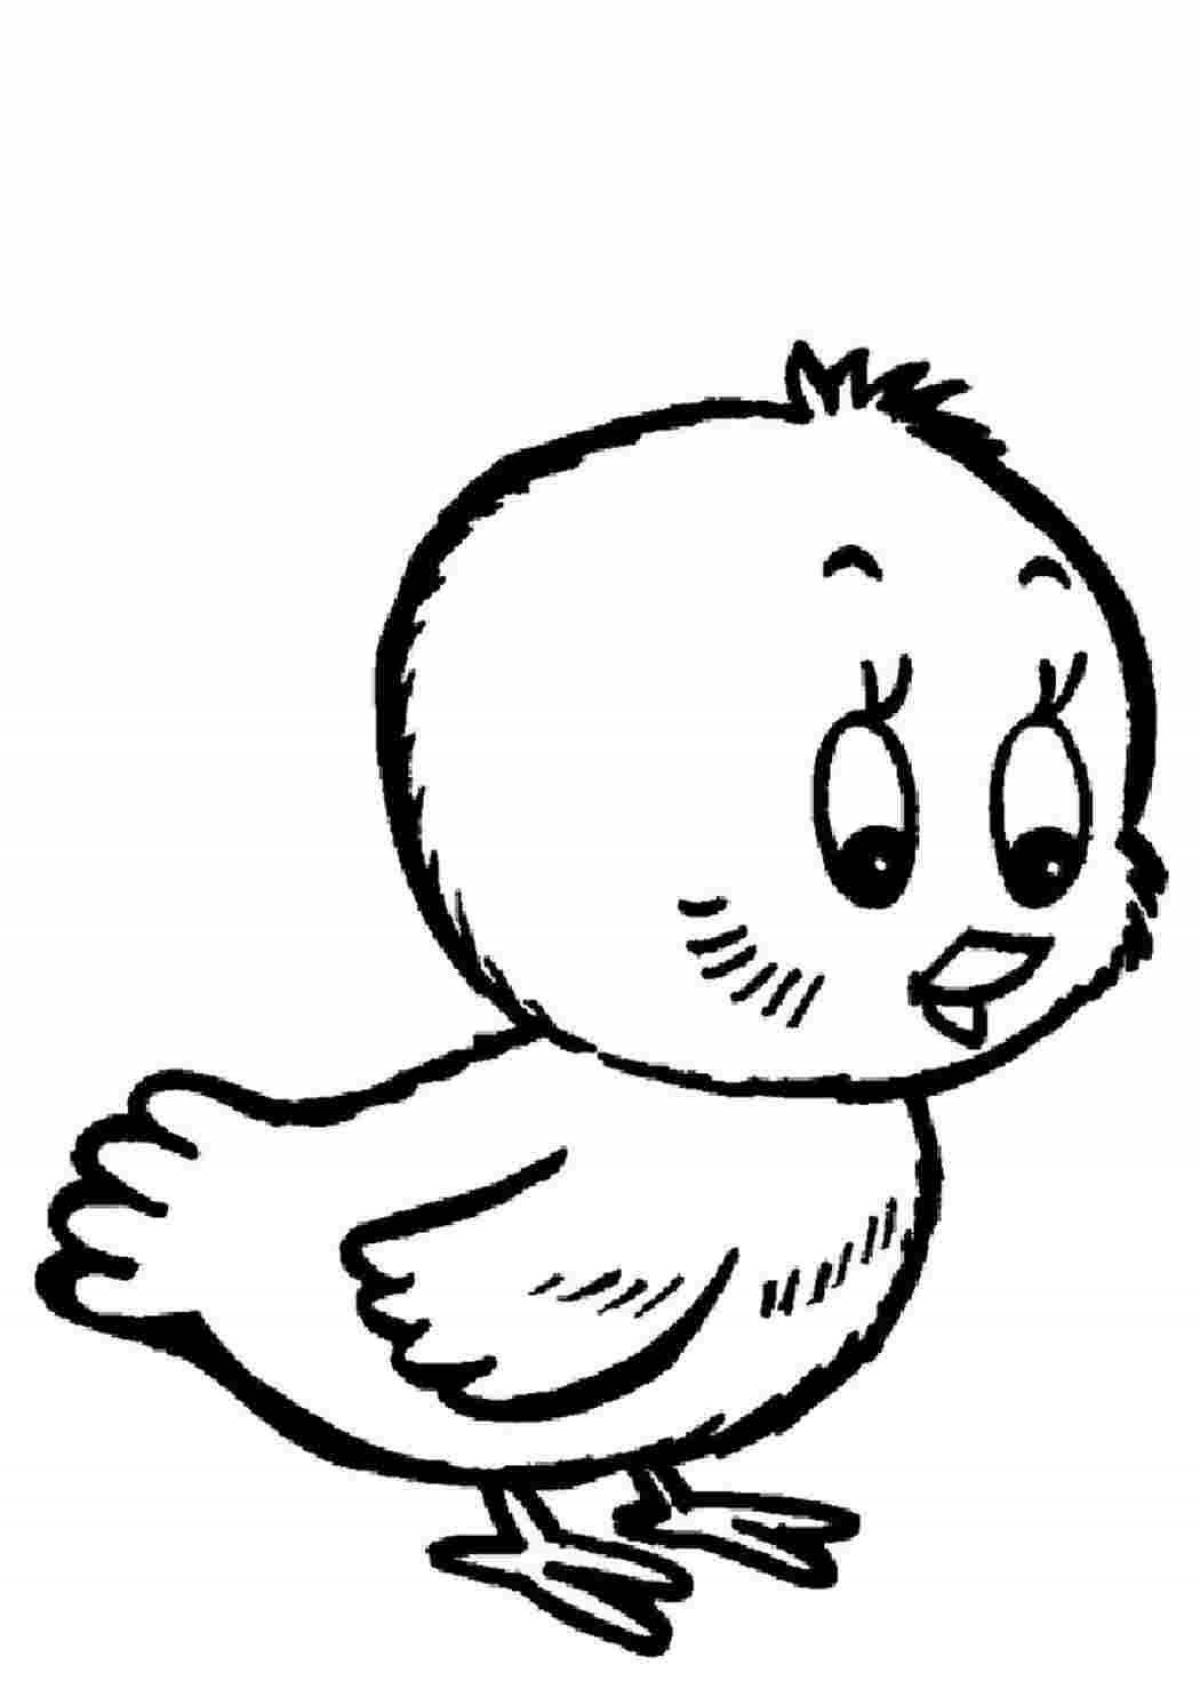 Adorable chick drawing for kids